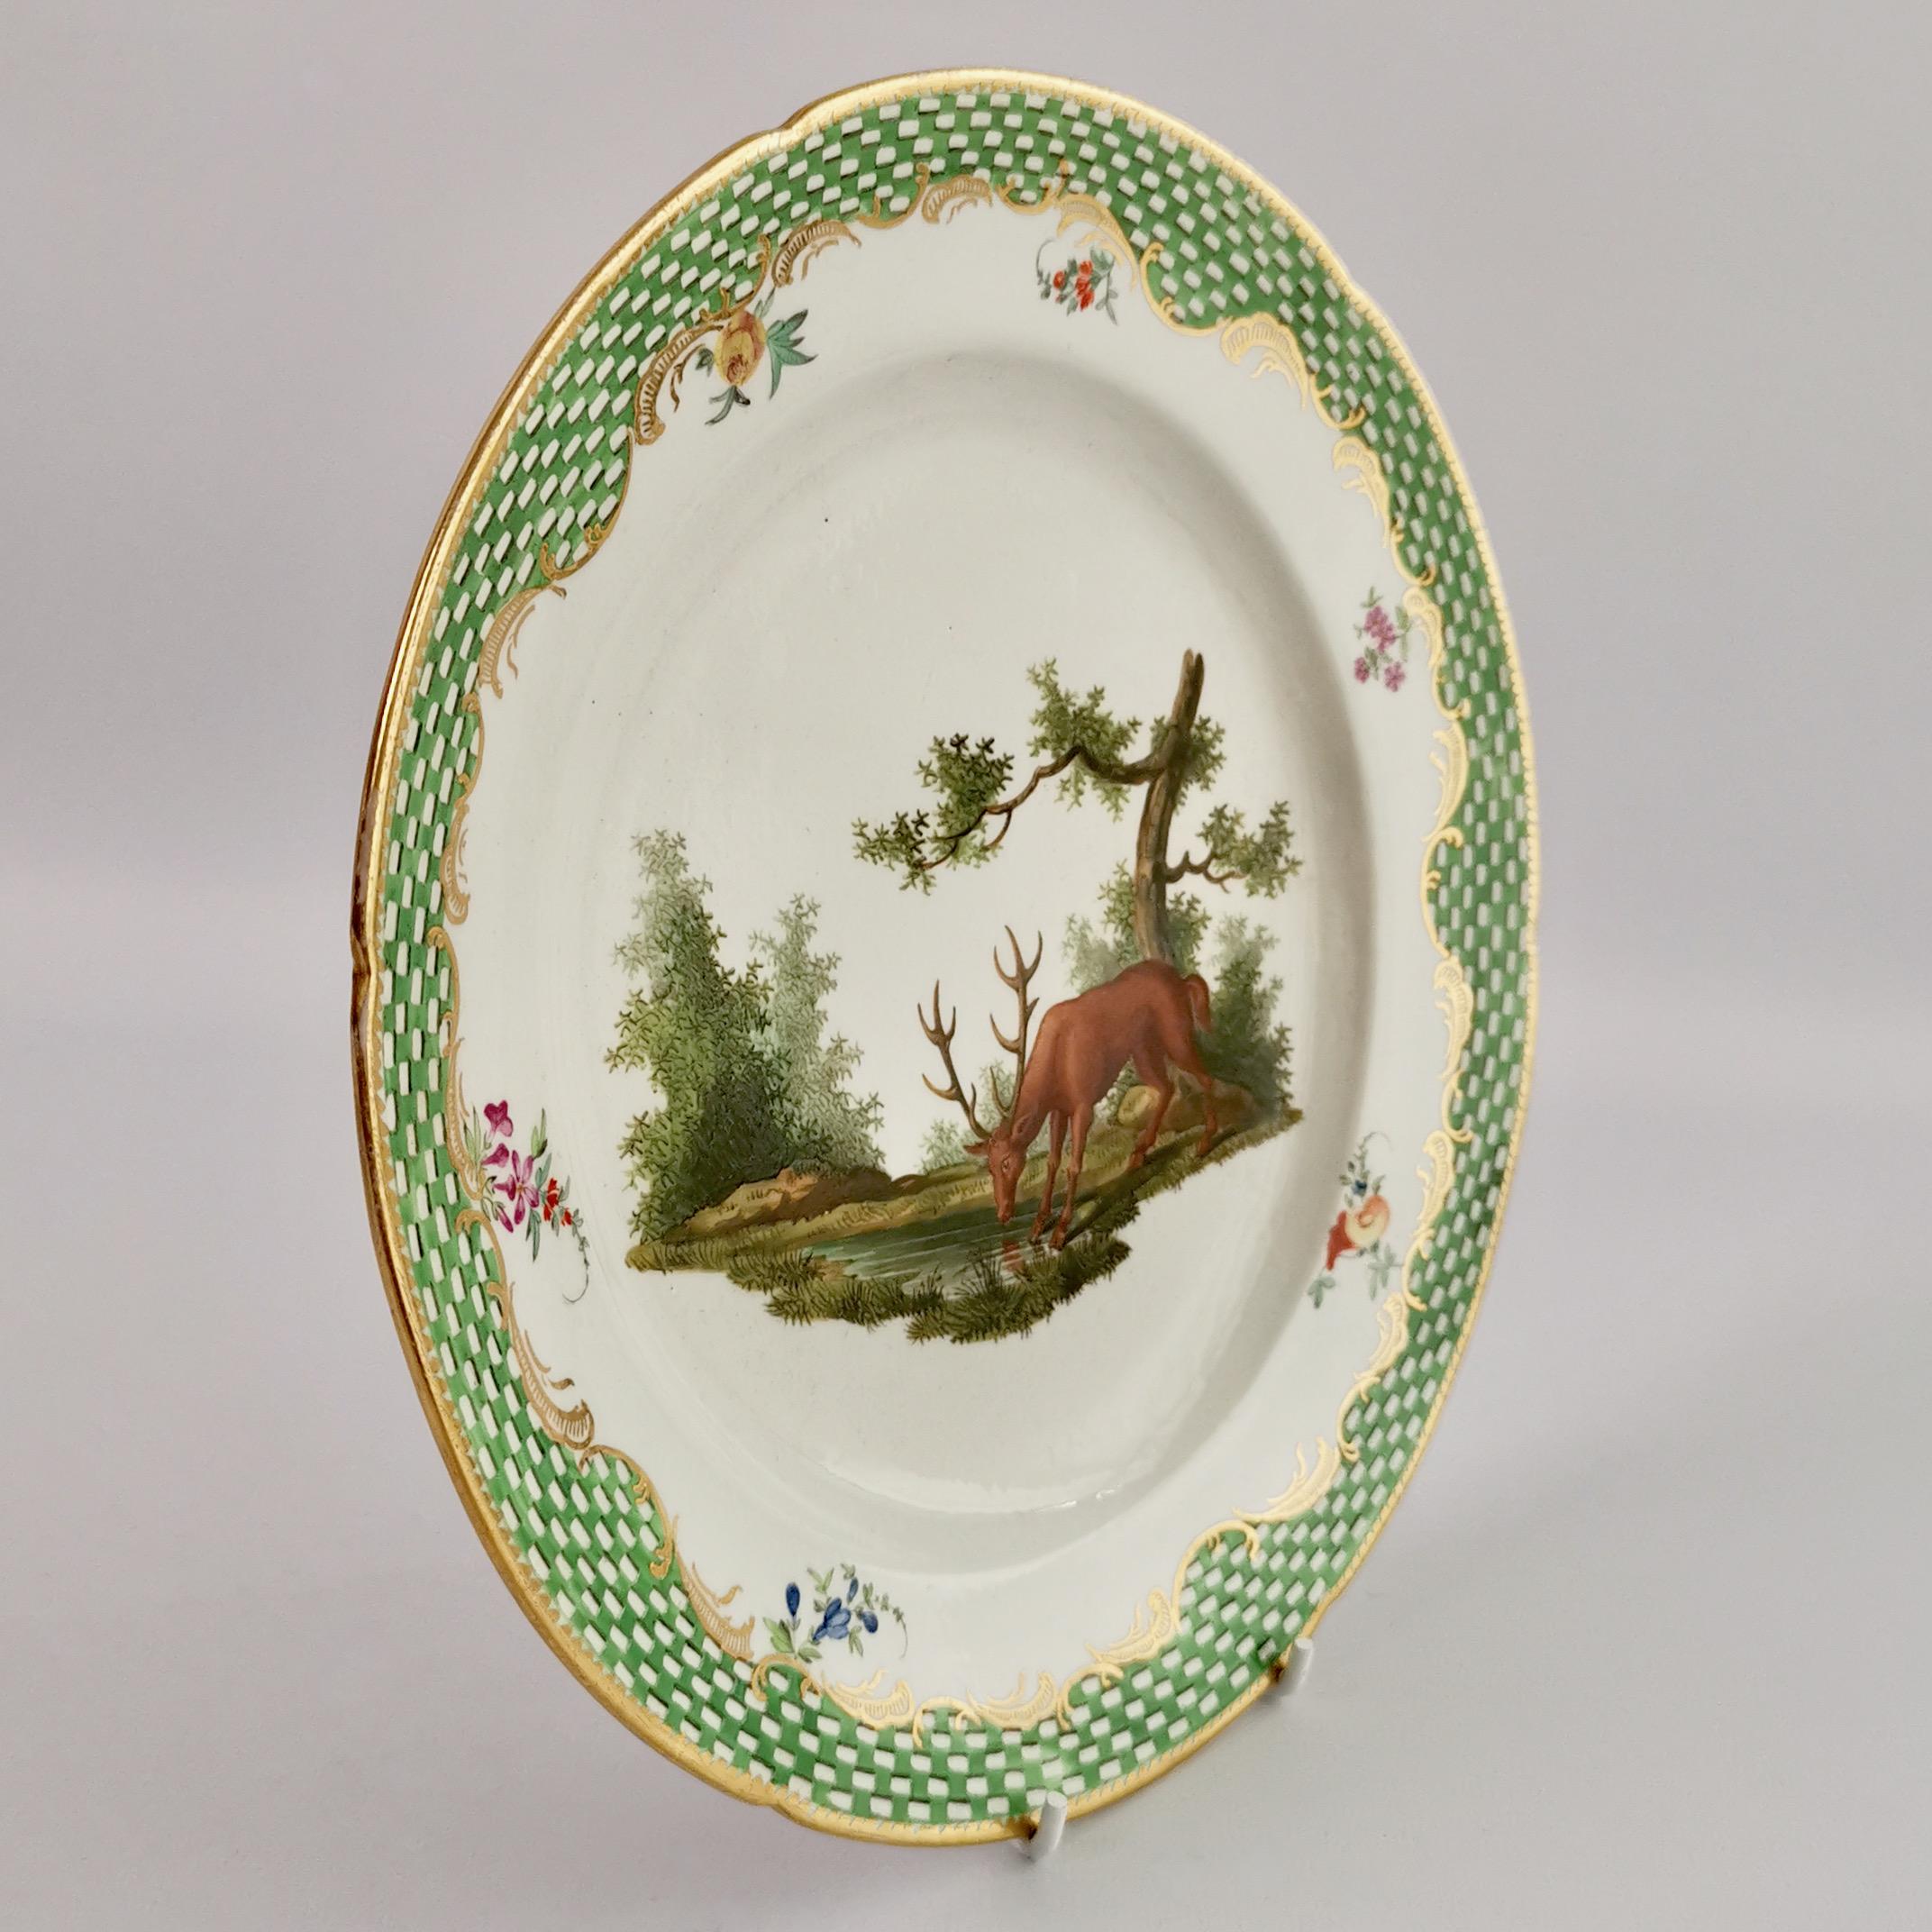 Coalport Porcelain Plate, Green Fables Pattern Drinking Stag, Georgian ca 1805 3